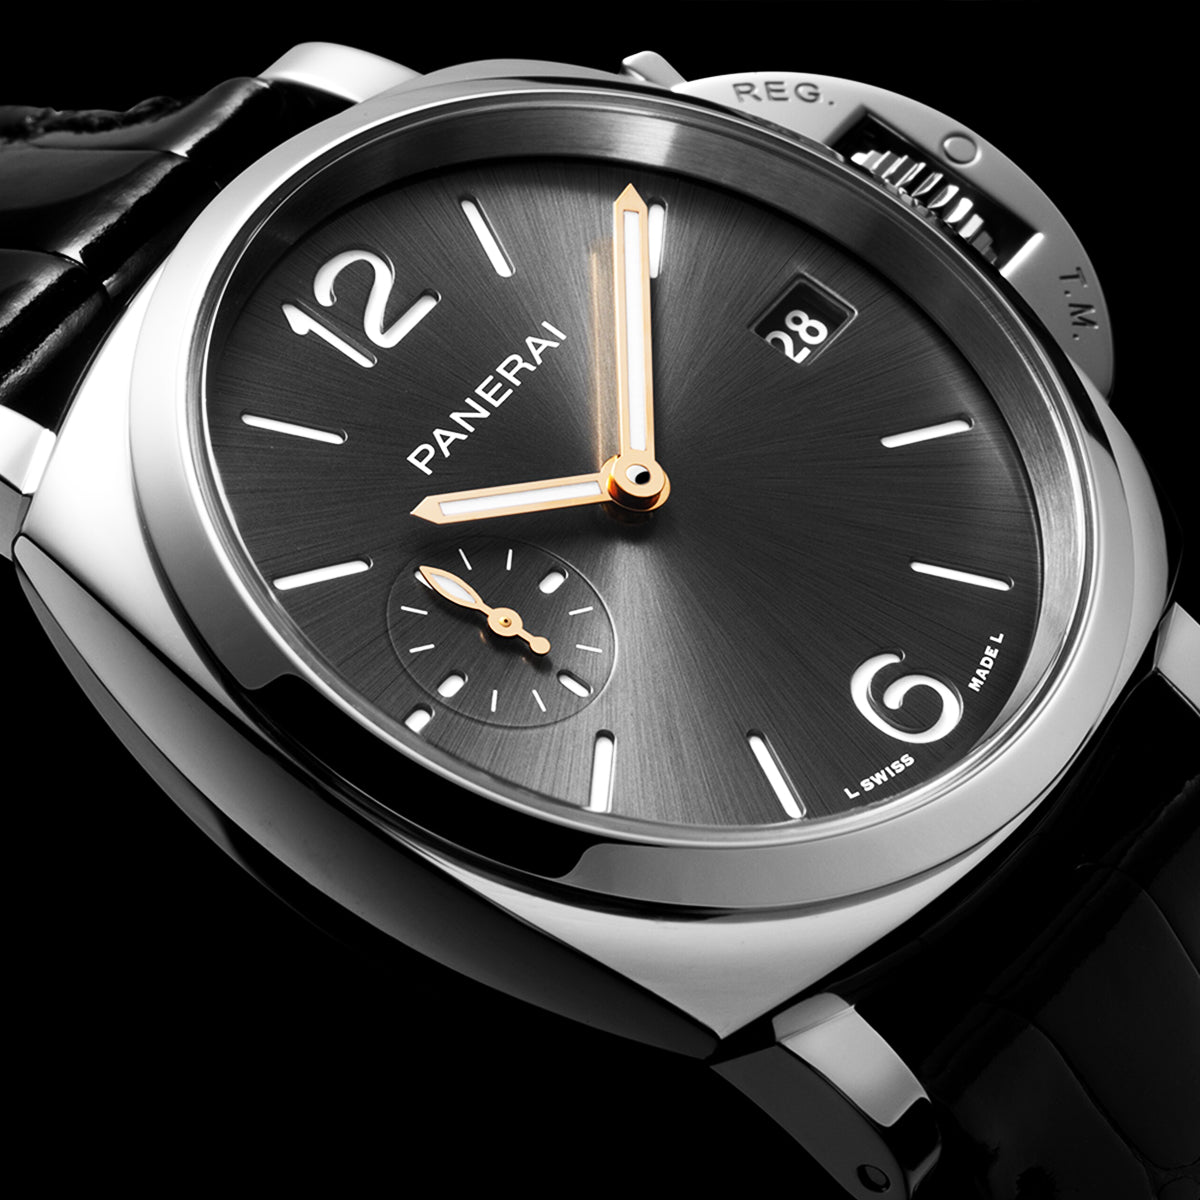 Luminor Due 38mm Anthracite Dial Automatic Leather Strap Watch